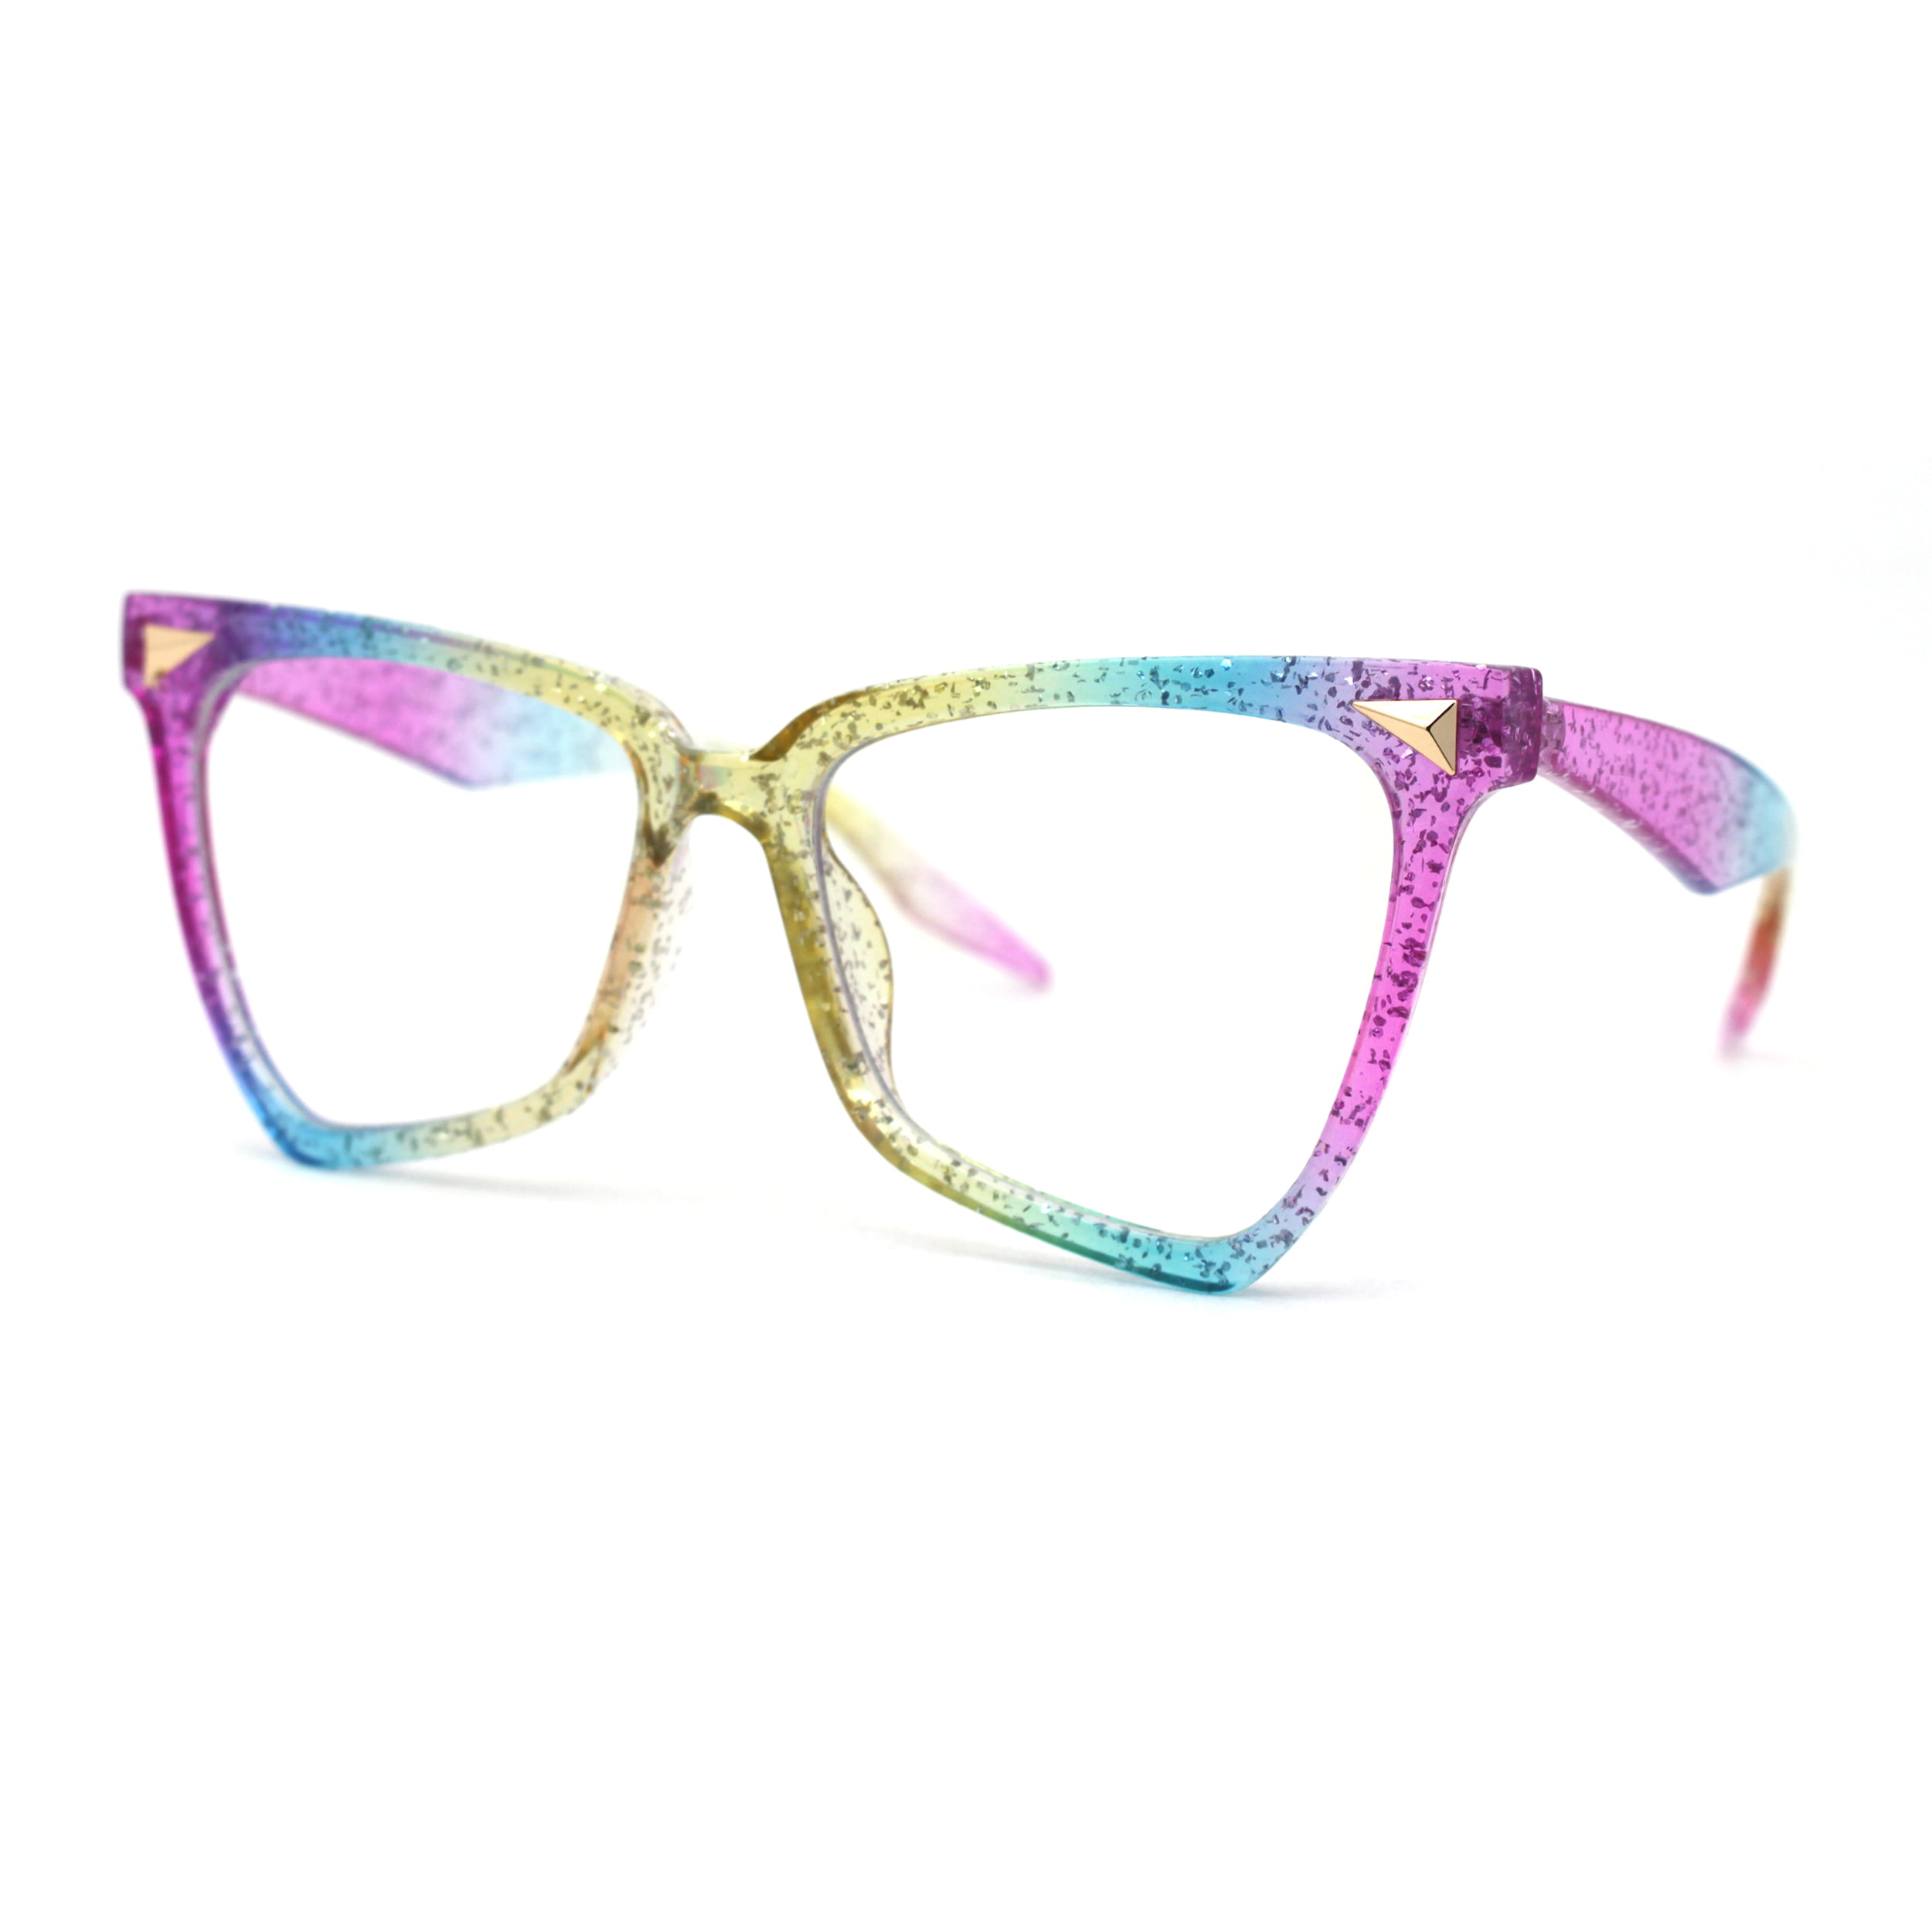 Blue light Rainbow protective glasses clear glasses protect eyes from blue light computer glasses back to school rainbow blue light glasses